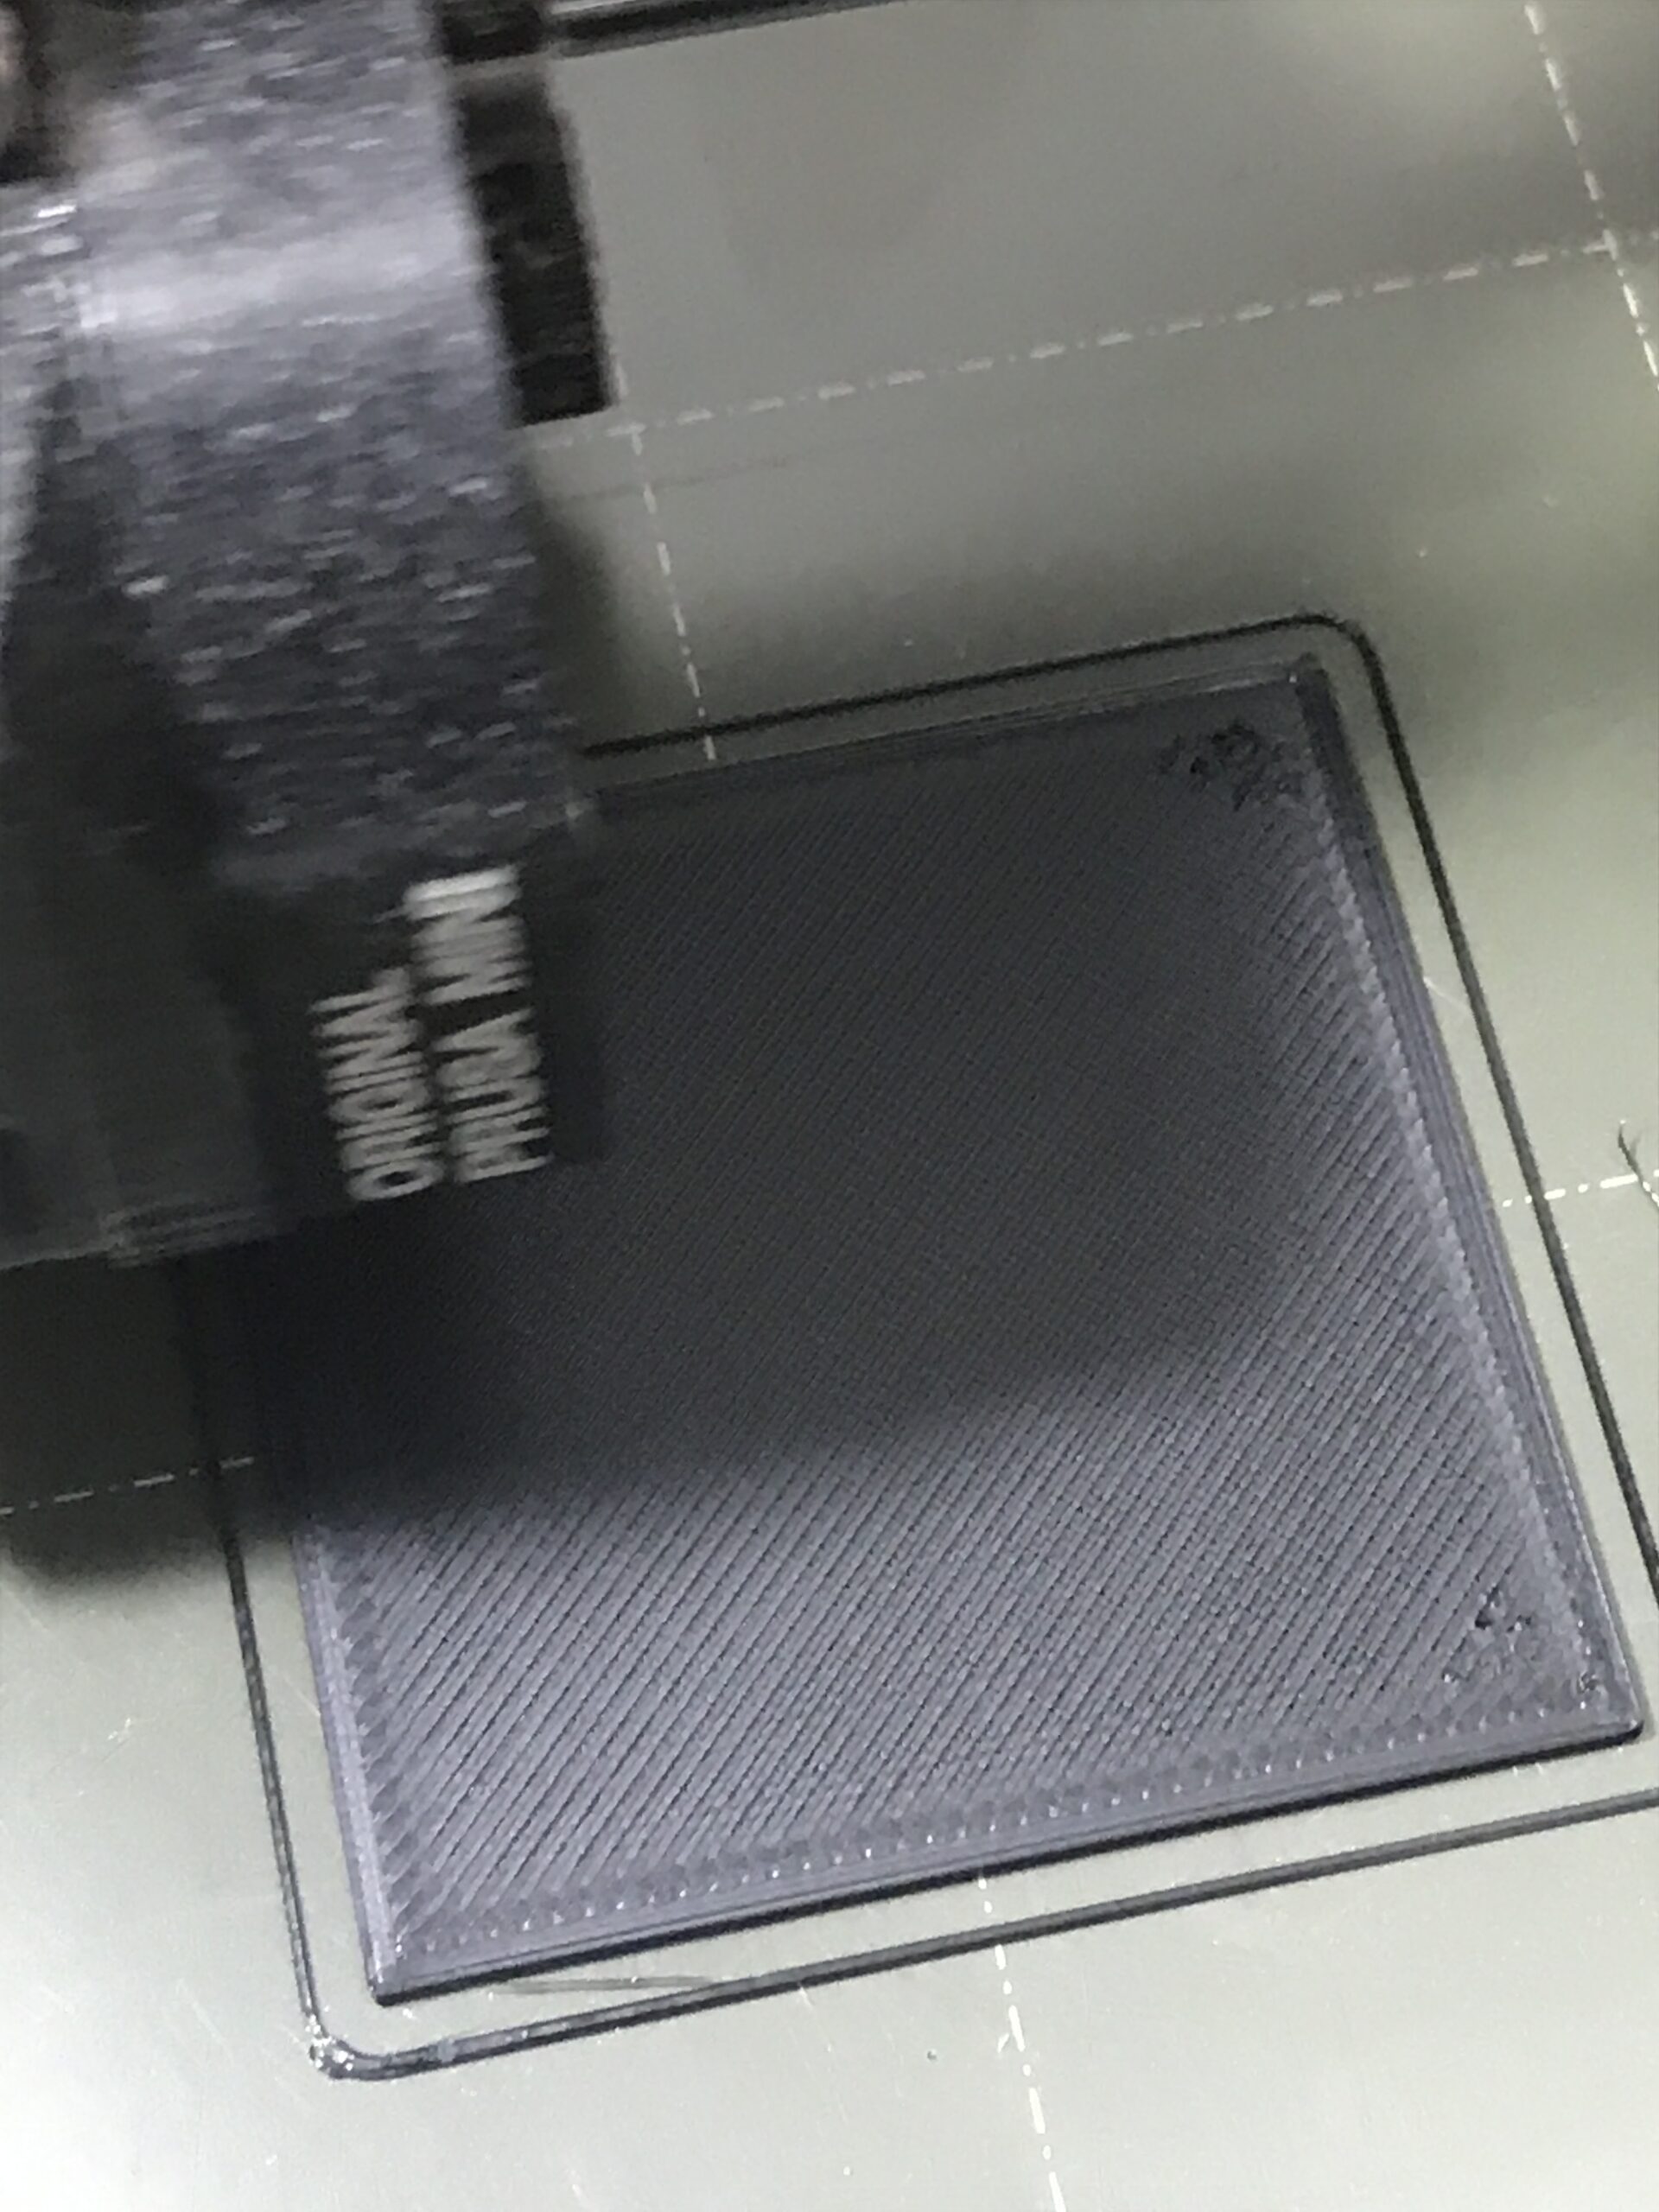 Troubleshooting PETG First Layer - Overextrusion? – General